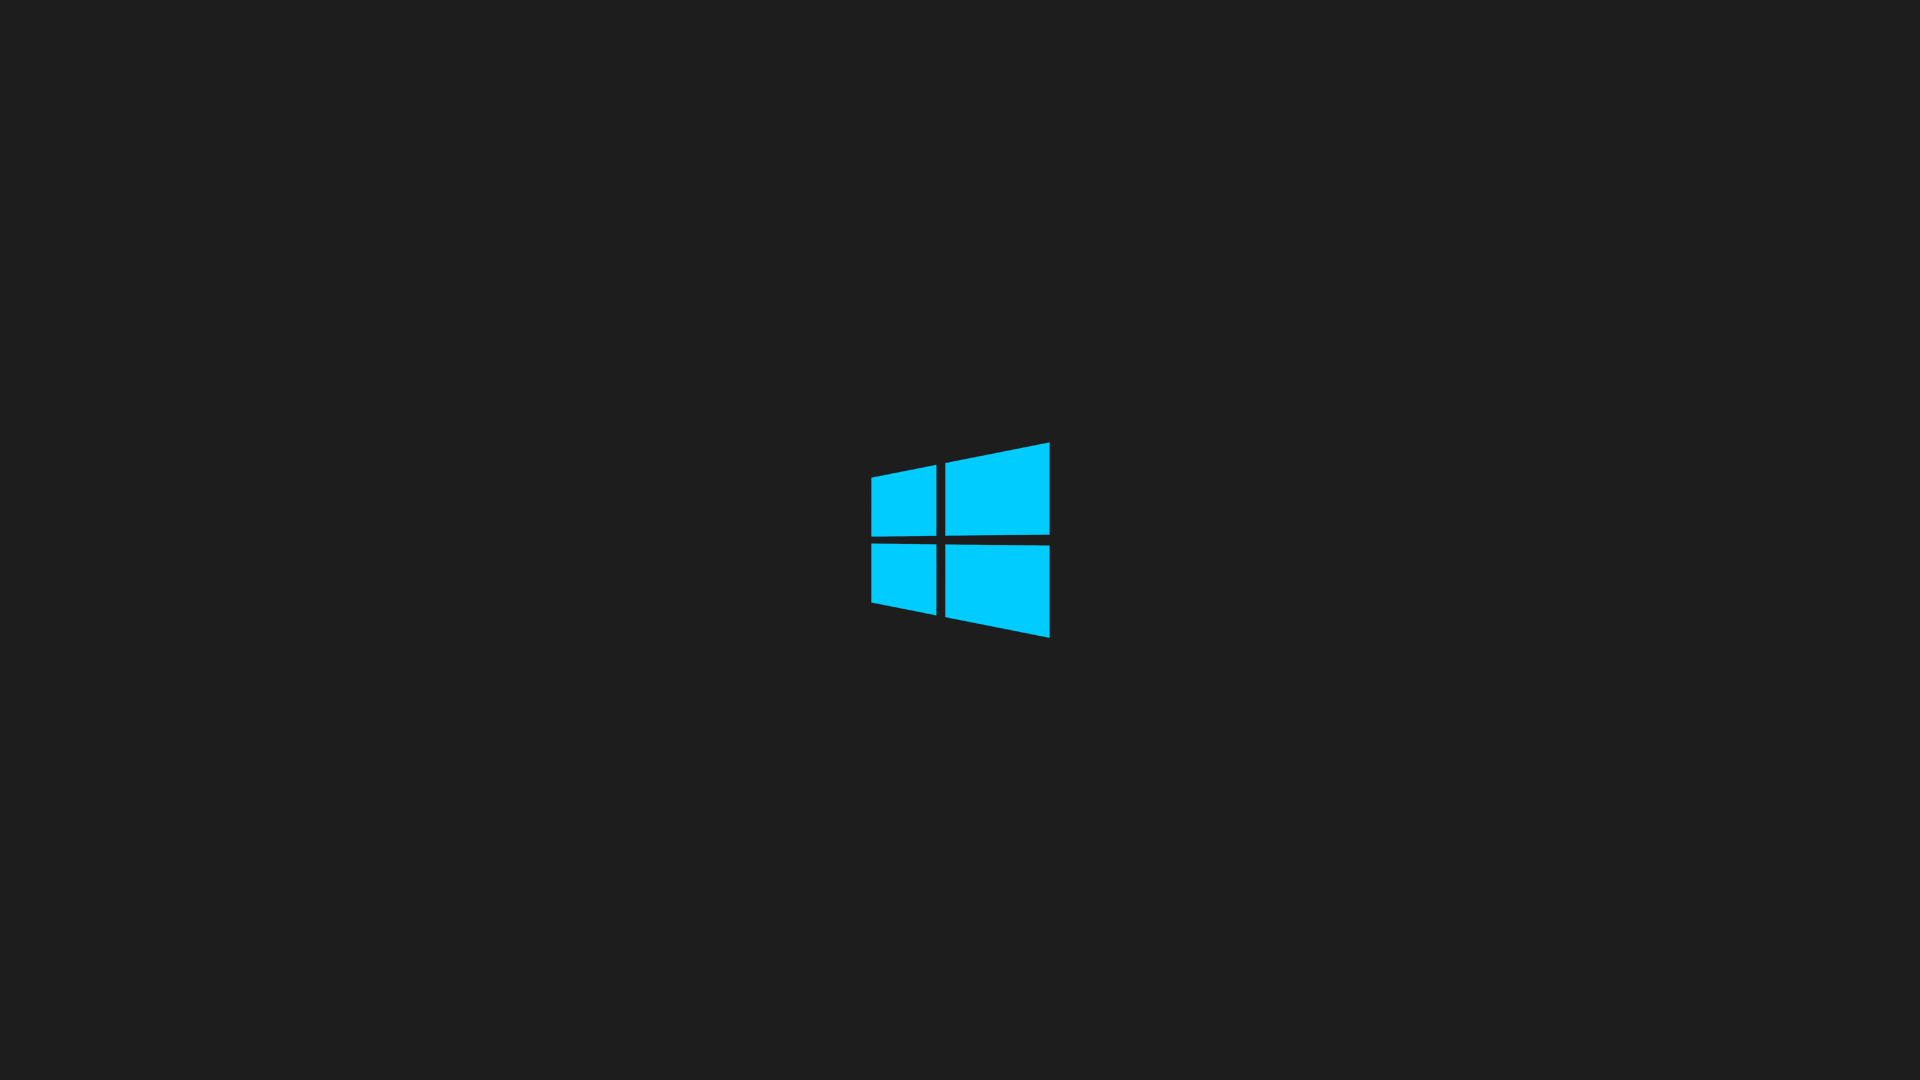 Wallpapers For > Windows 8 Backgrounds Dark